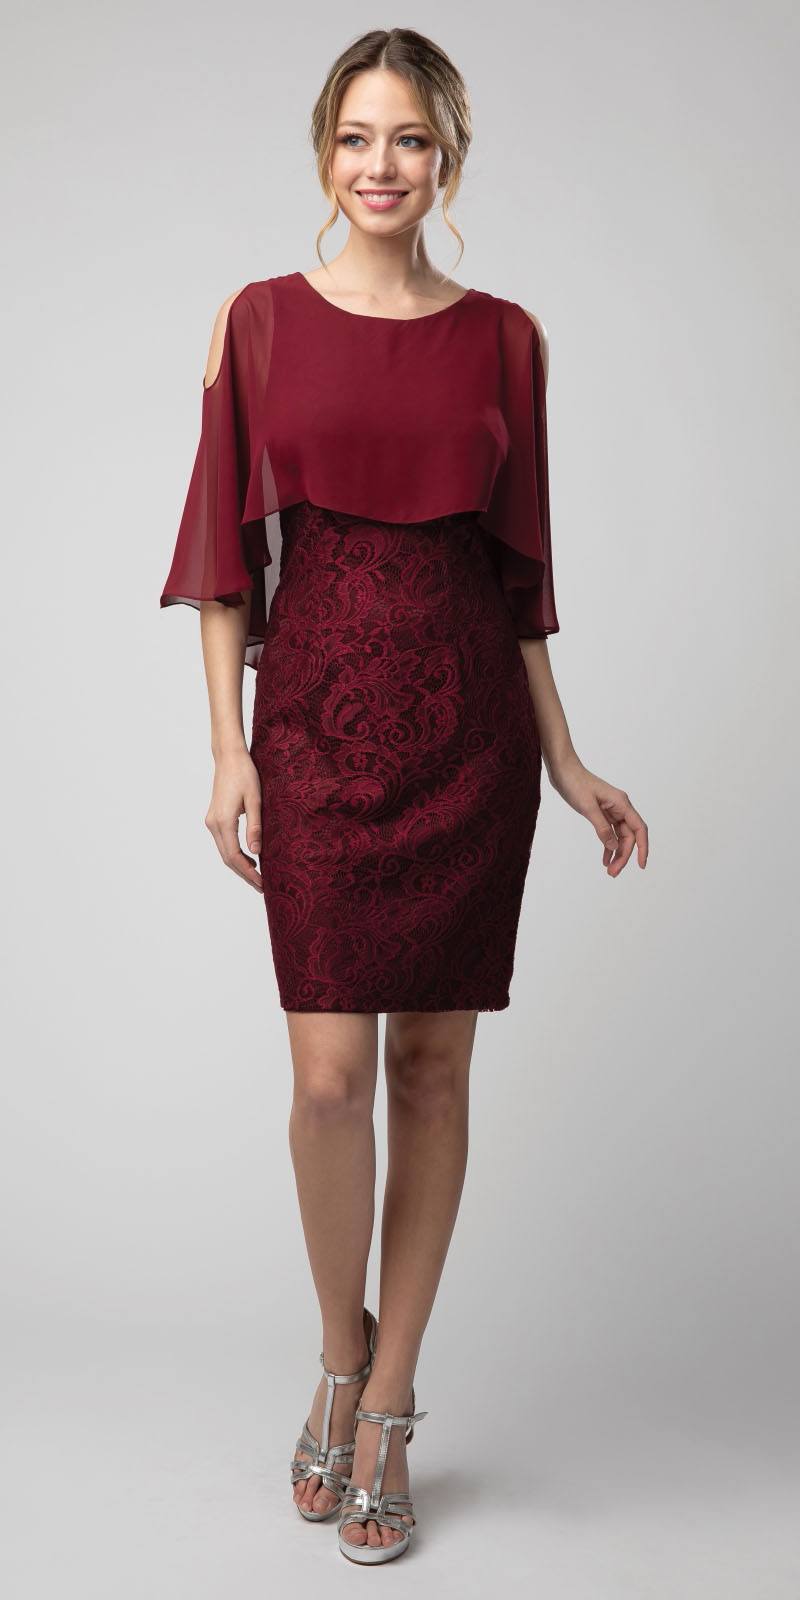 Lace Short Dress Burgundy with Cold-Shoulder Poncho